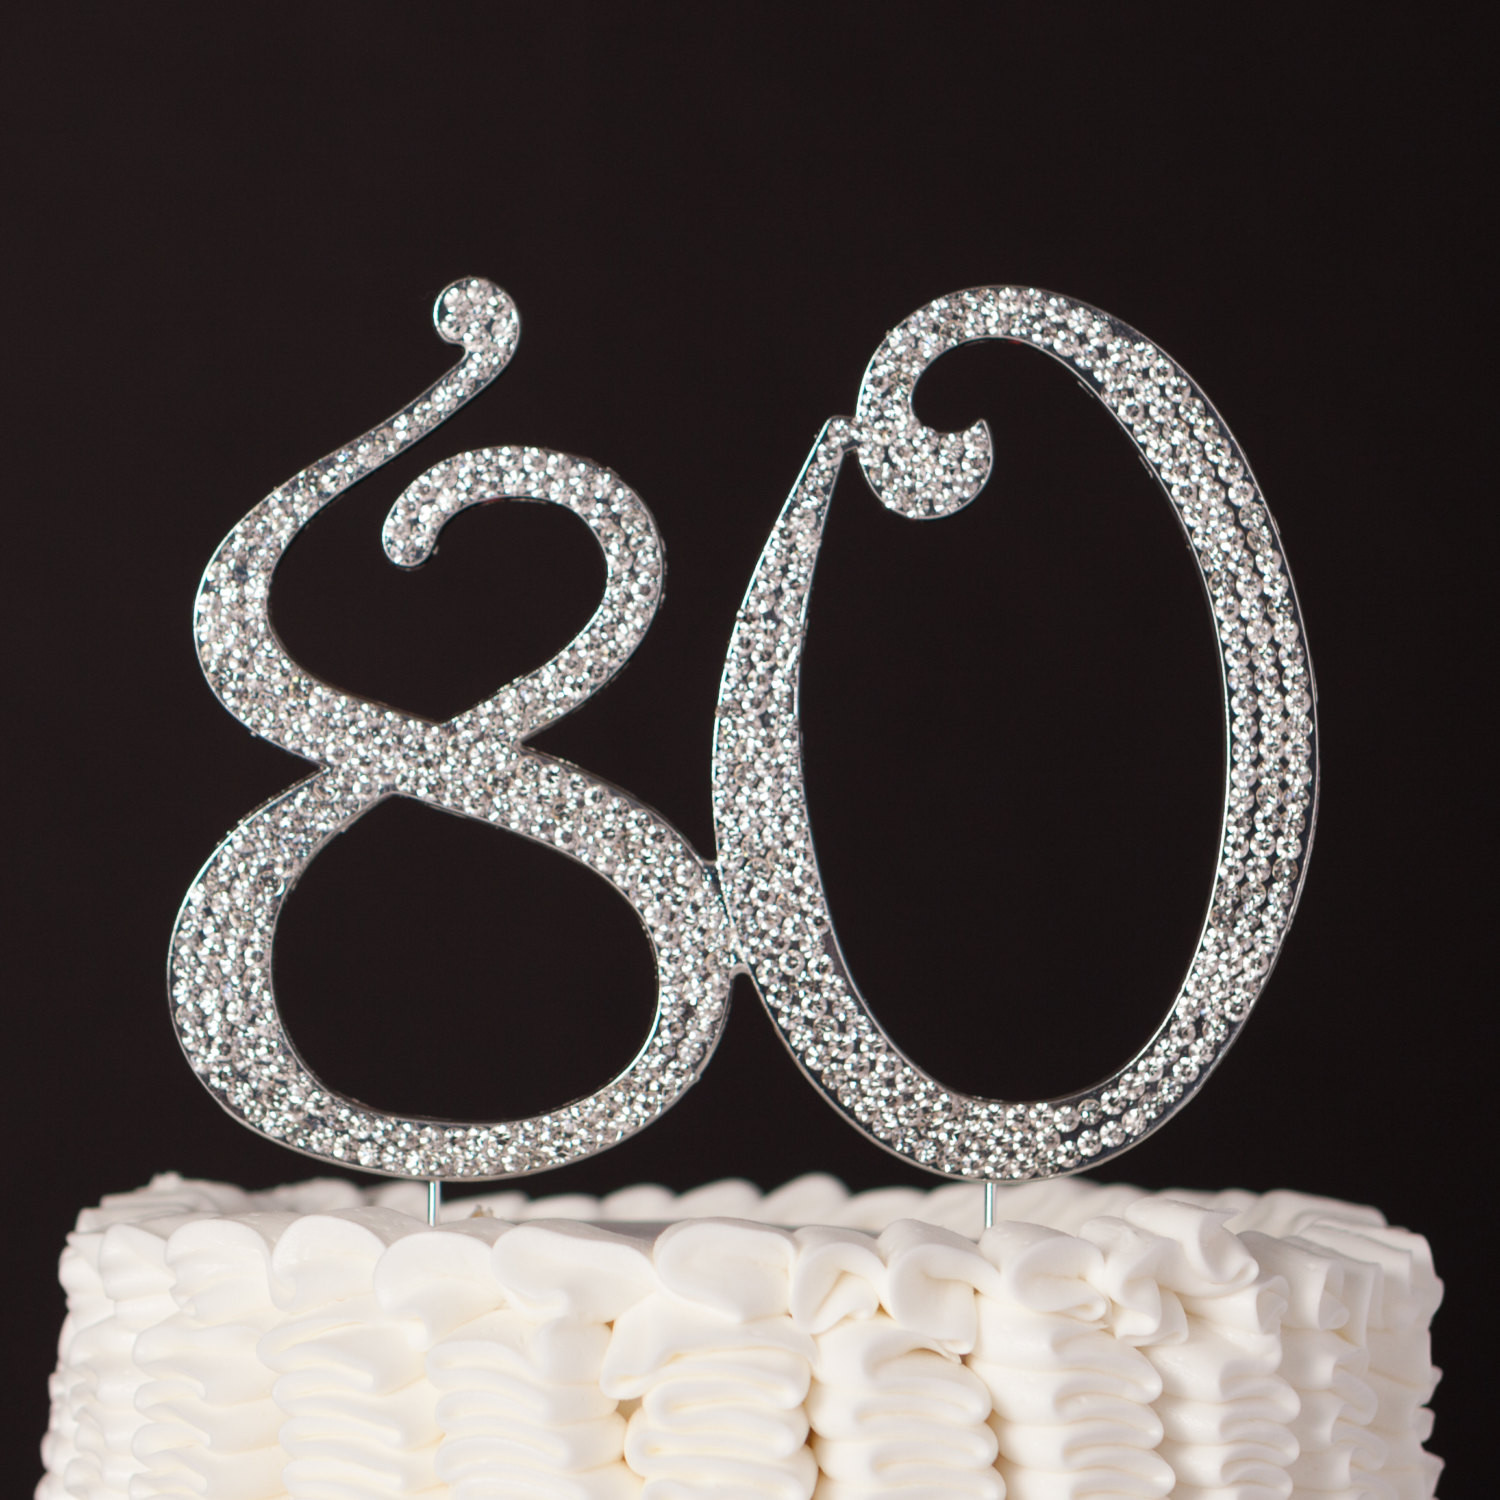 80th Birthday Cake Toppers
 80 Cake Topper 80th Birthday or Anniversary Decorations